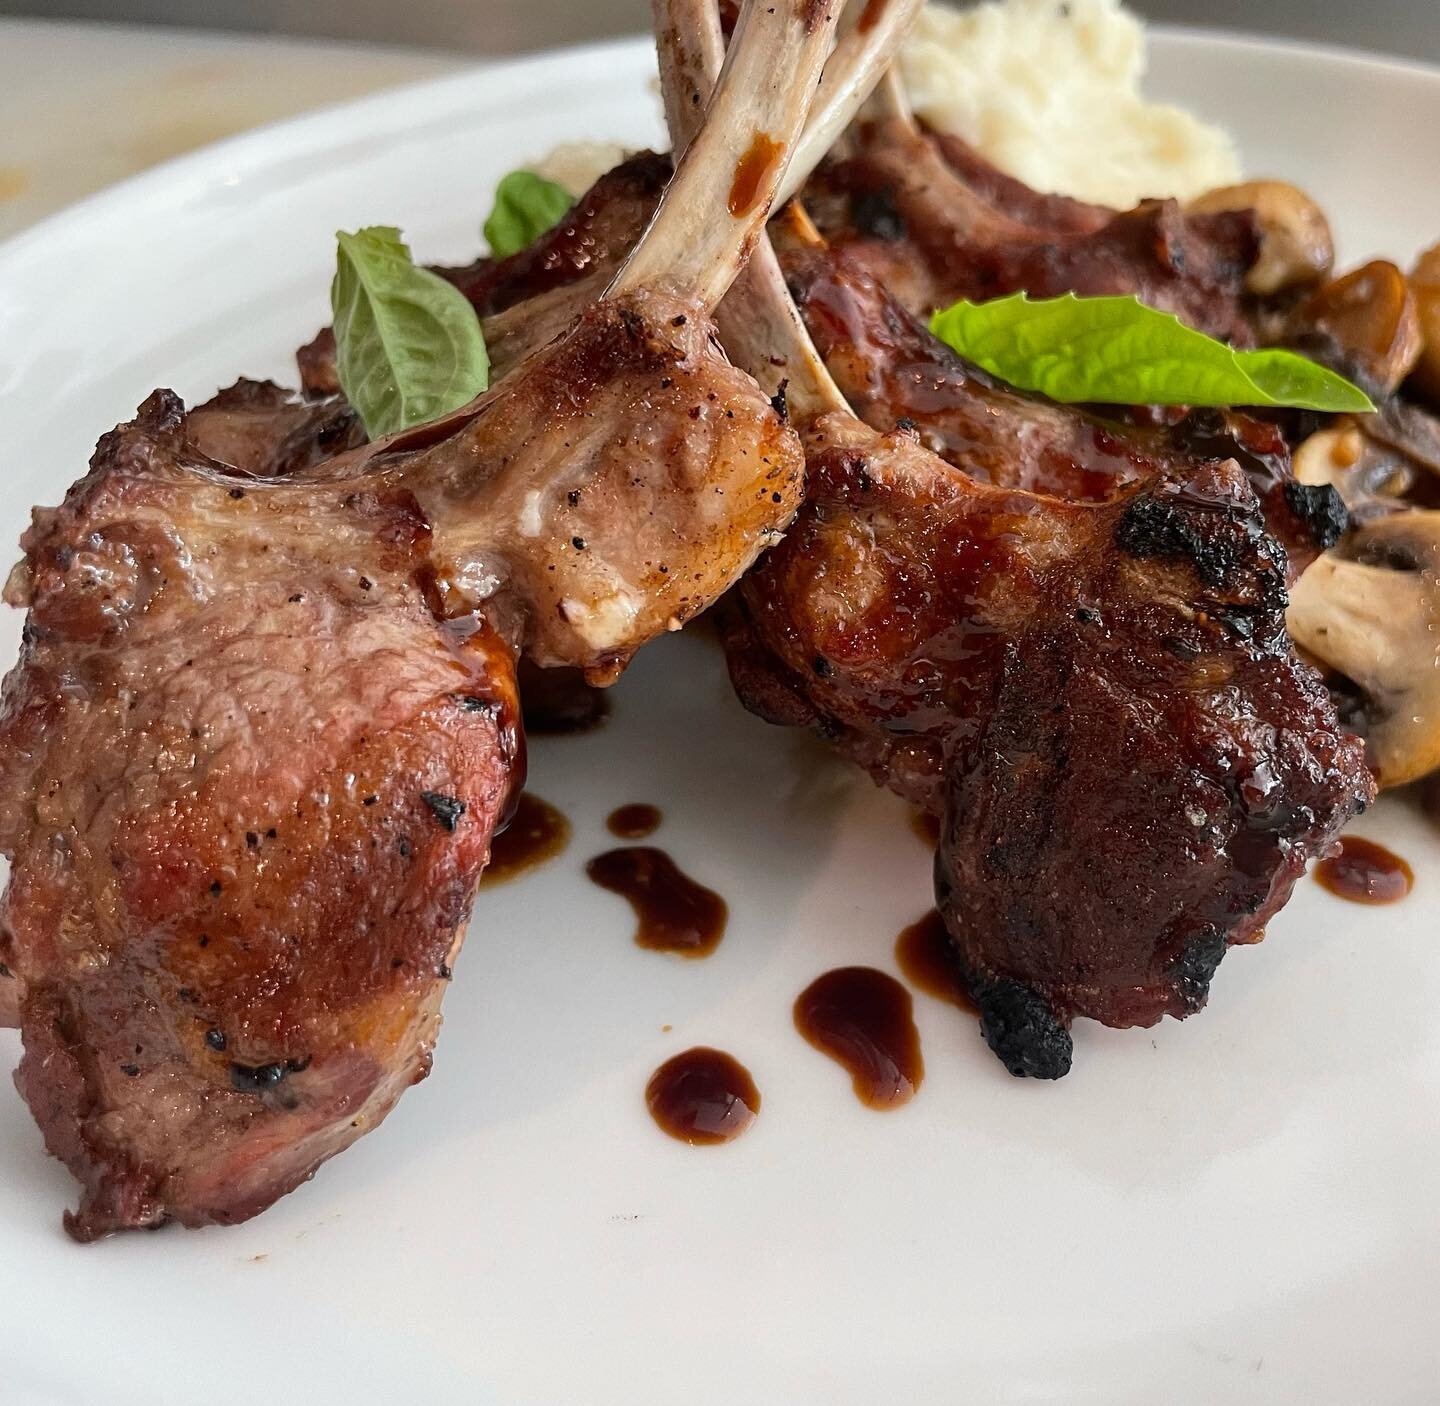 Father&rsquo;s Day is only a few days away and you haven&rsquo;t made a reservation yet? Better get to it 😋 give us a call to secure that table Sunday!  Until then drool over our amazingly juicy Rack of Lamb 🤤